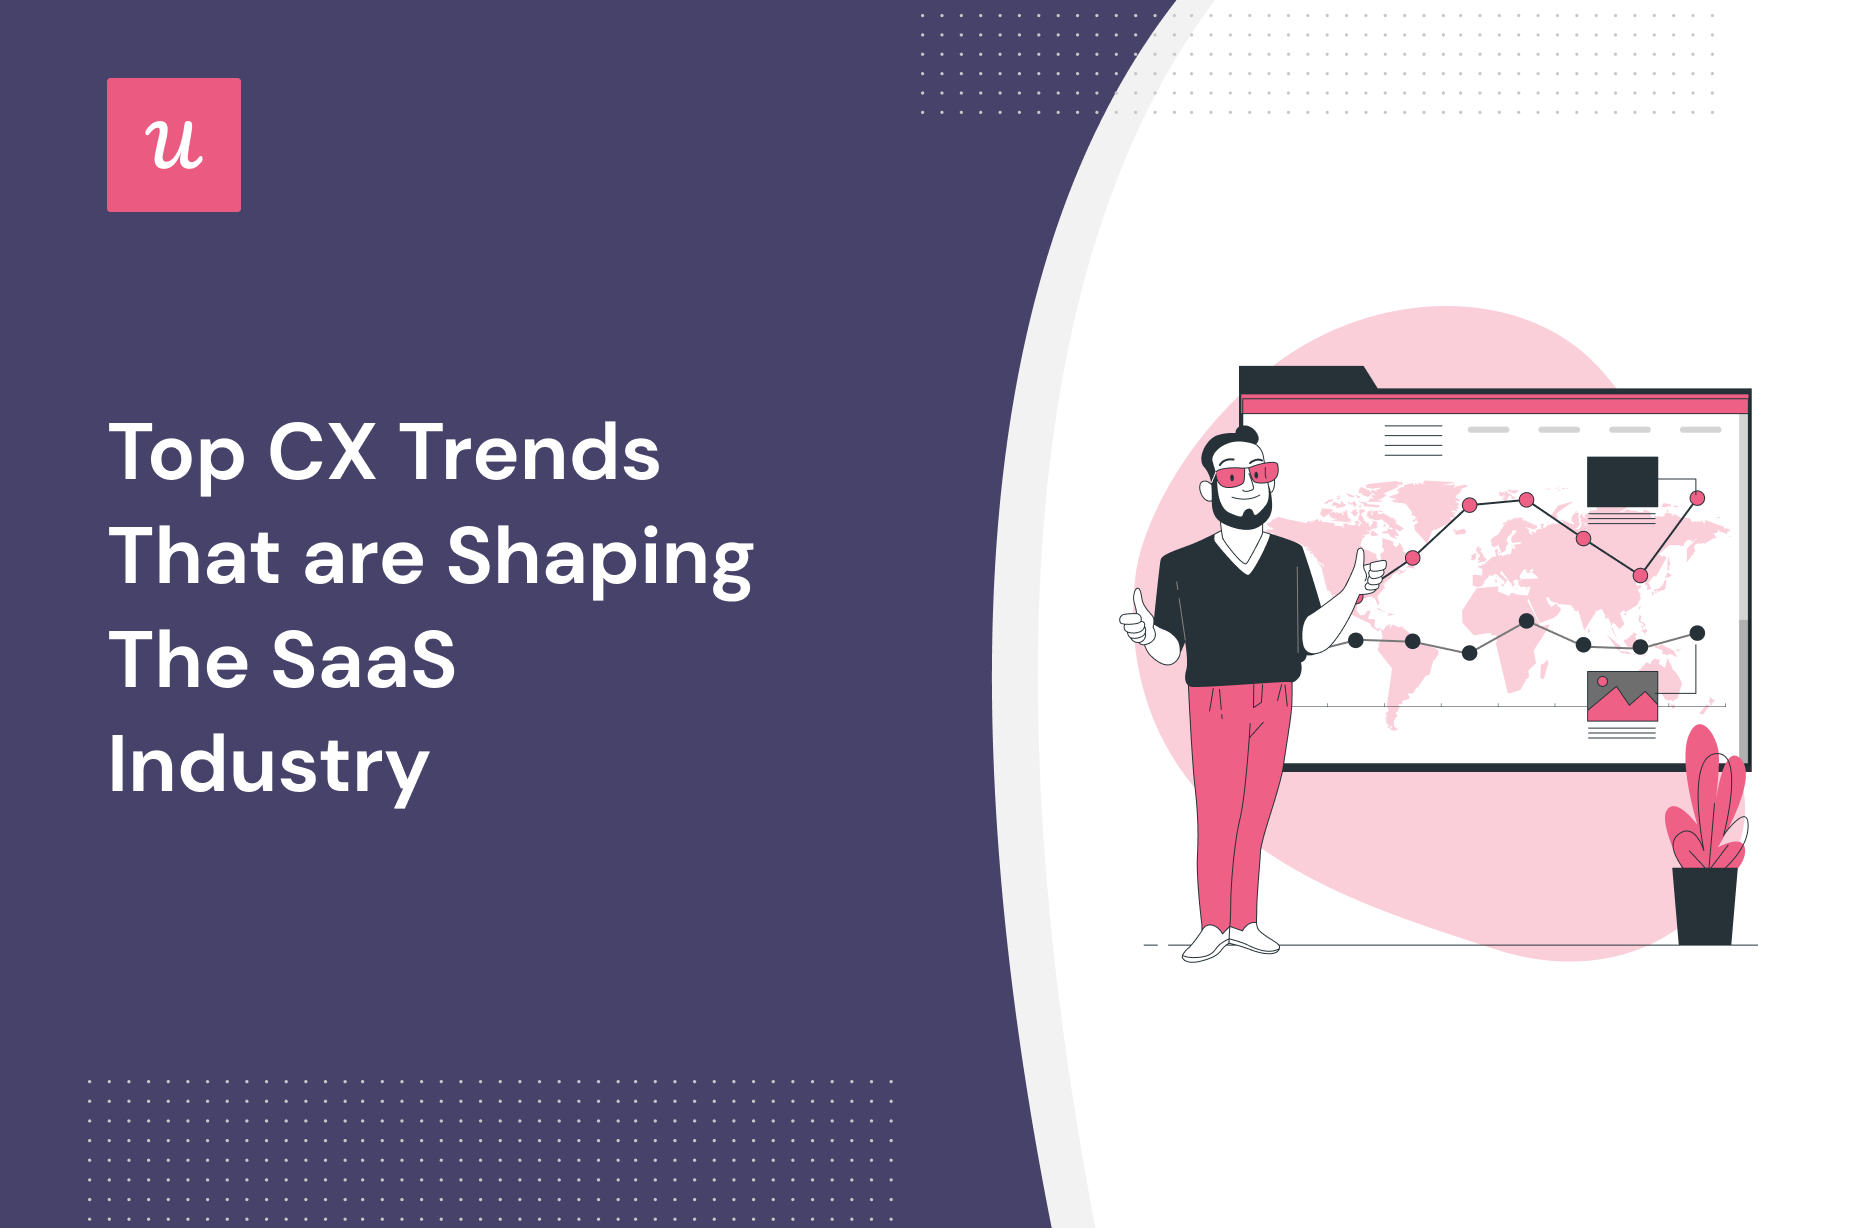 Top CX Trends That Are Shaping the SaaS Industry in 2023